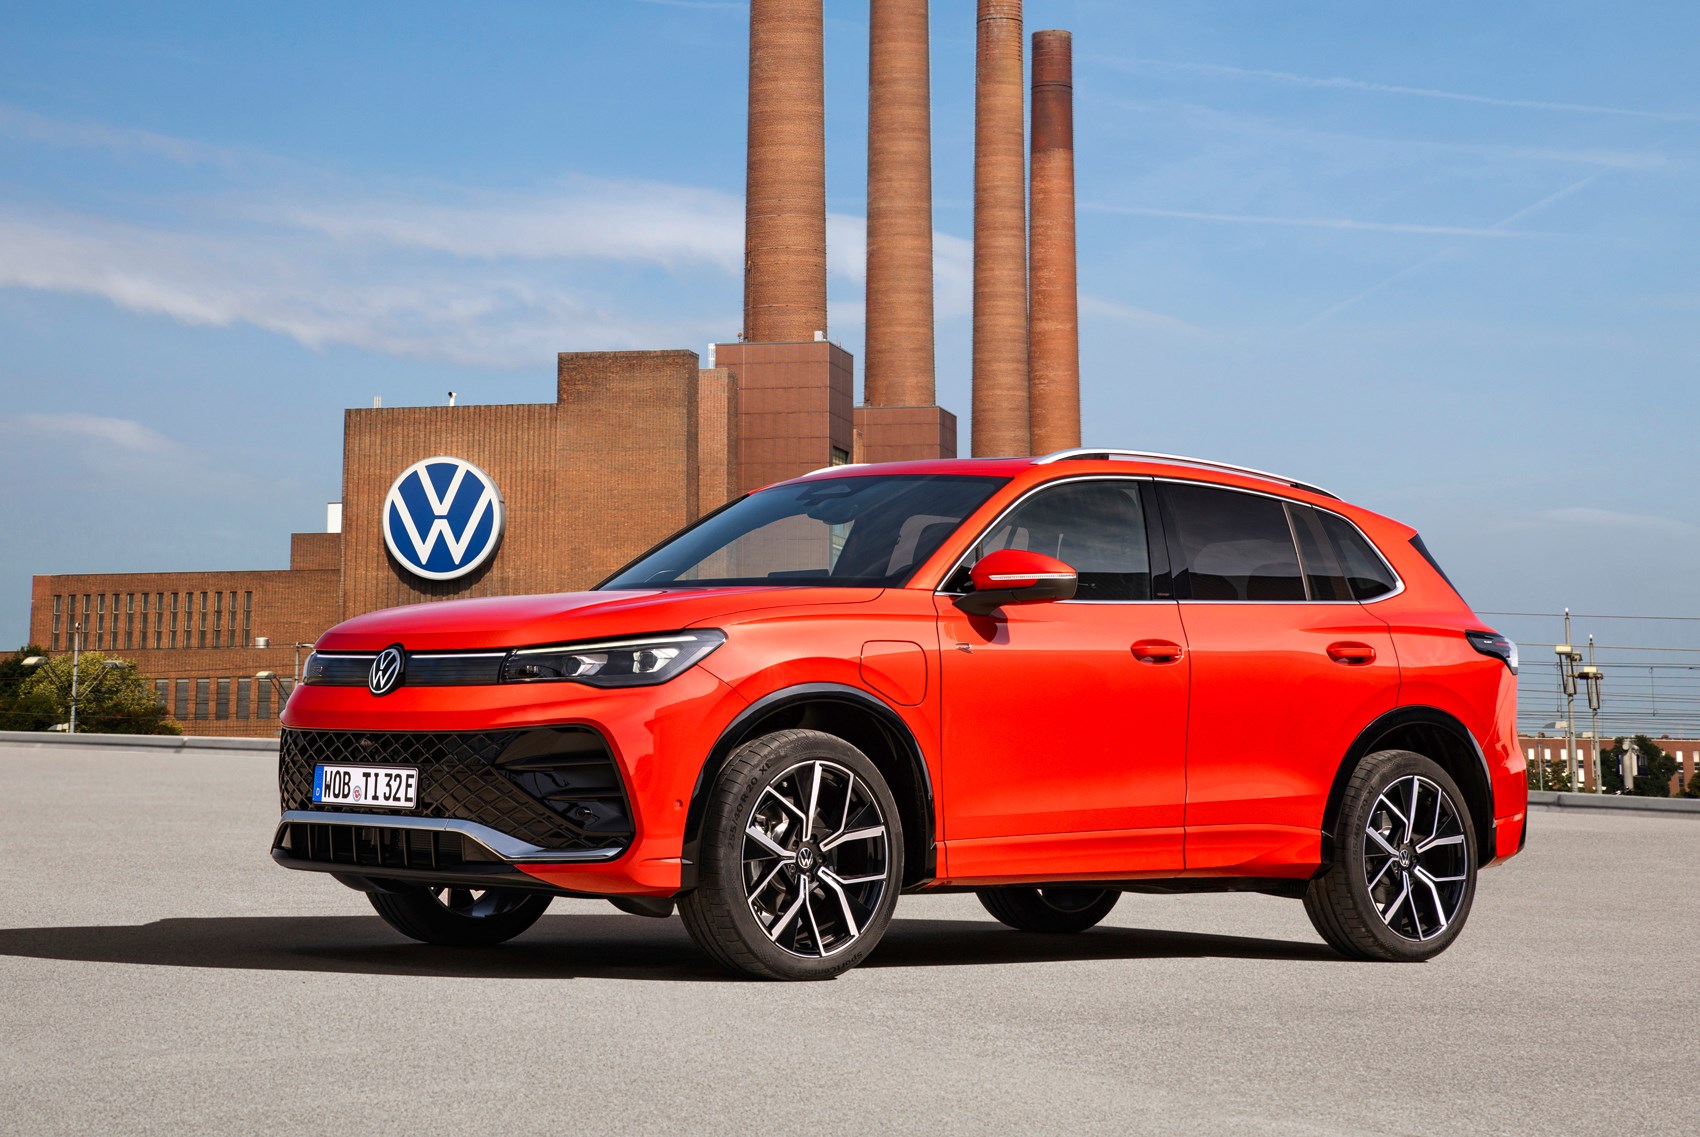 VW's new Tiguan starts from £34k in the UK